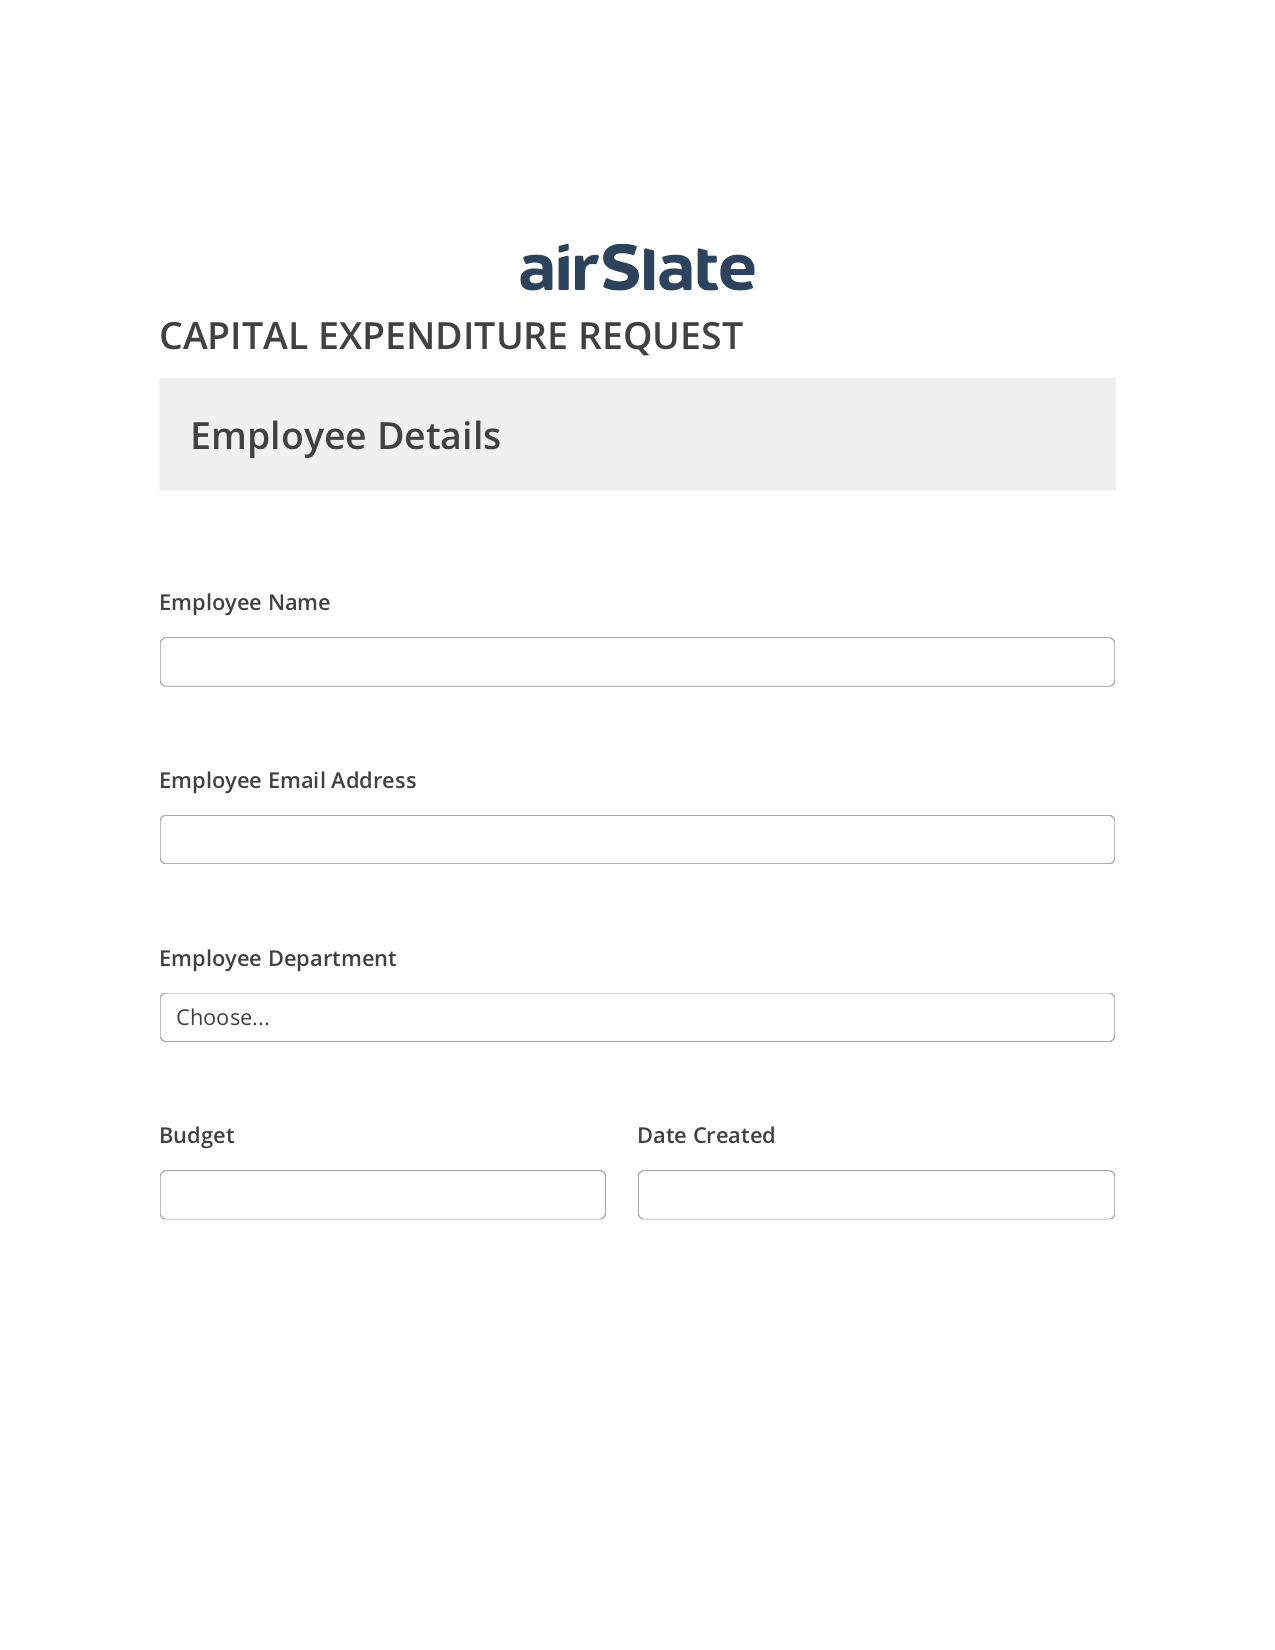 Capital Expenditure Request Approval Workflow Pre-fill Dropdowns from Smartsheet Bot, Custom Field's Value Bot, Export to NetSuite Bot